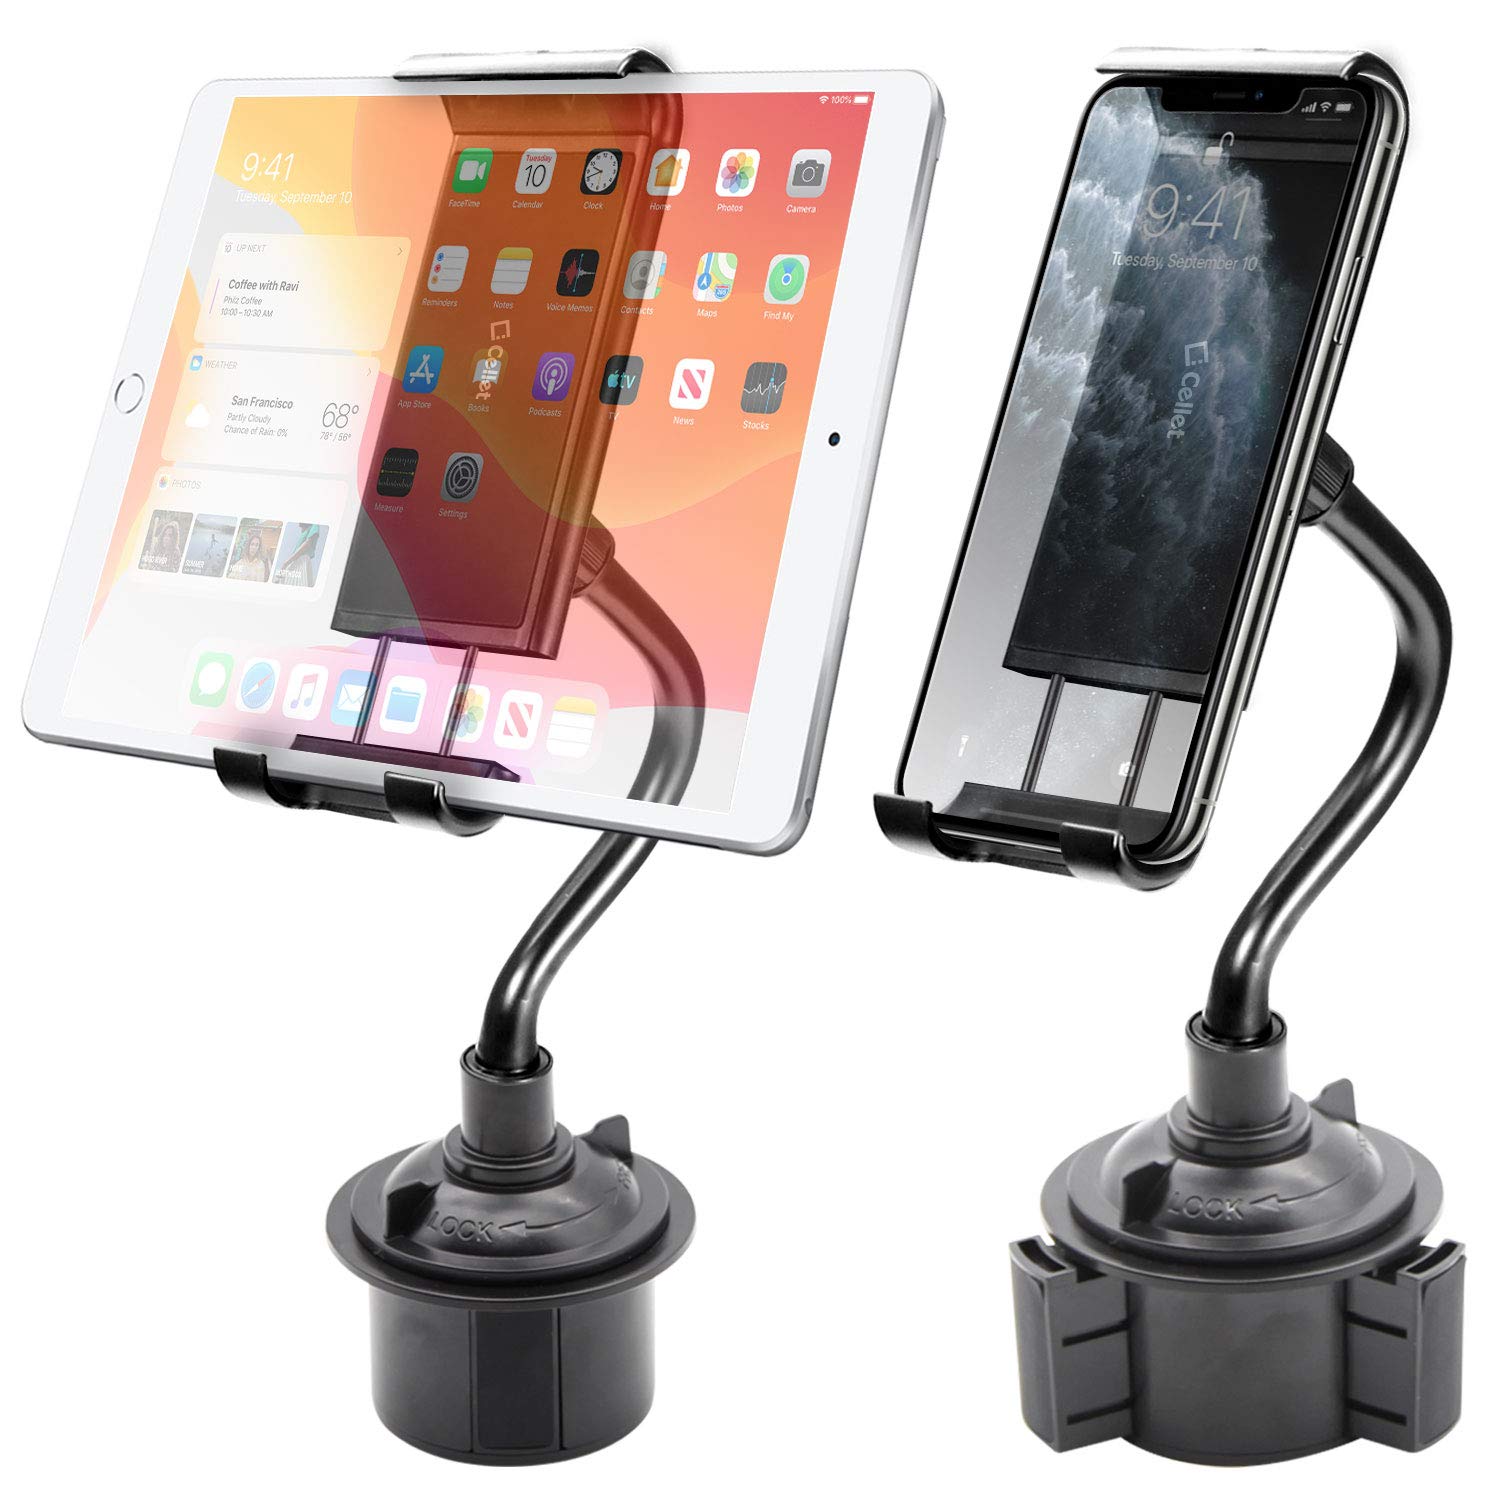 Cellet Cup Holder Phone Mount & Tablet Mount Gooseneck Compatible with iPad Pro Air Mini iPhone 14 Pro Max Plus 13 12 11 Note 20 10 Galaxy Z Fold Z Flip S22 S21 S20 Google Pixel Kindle Fire HD 8 10